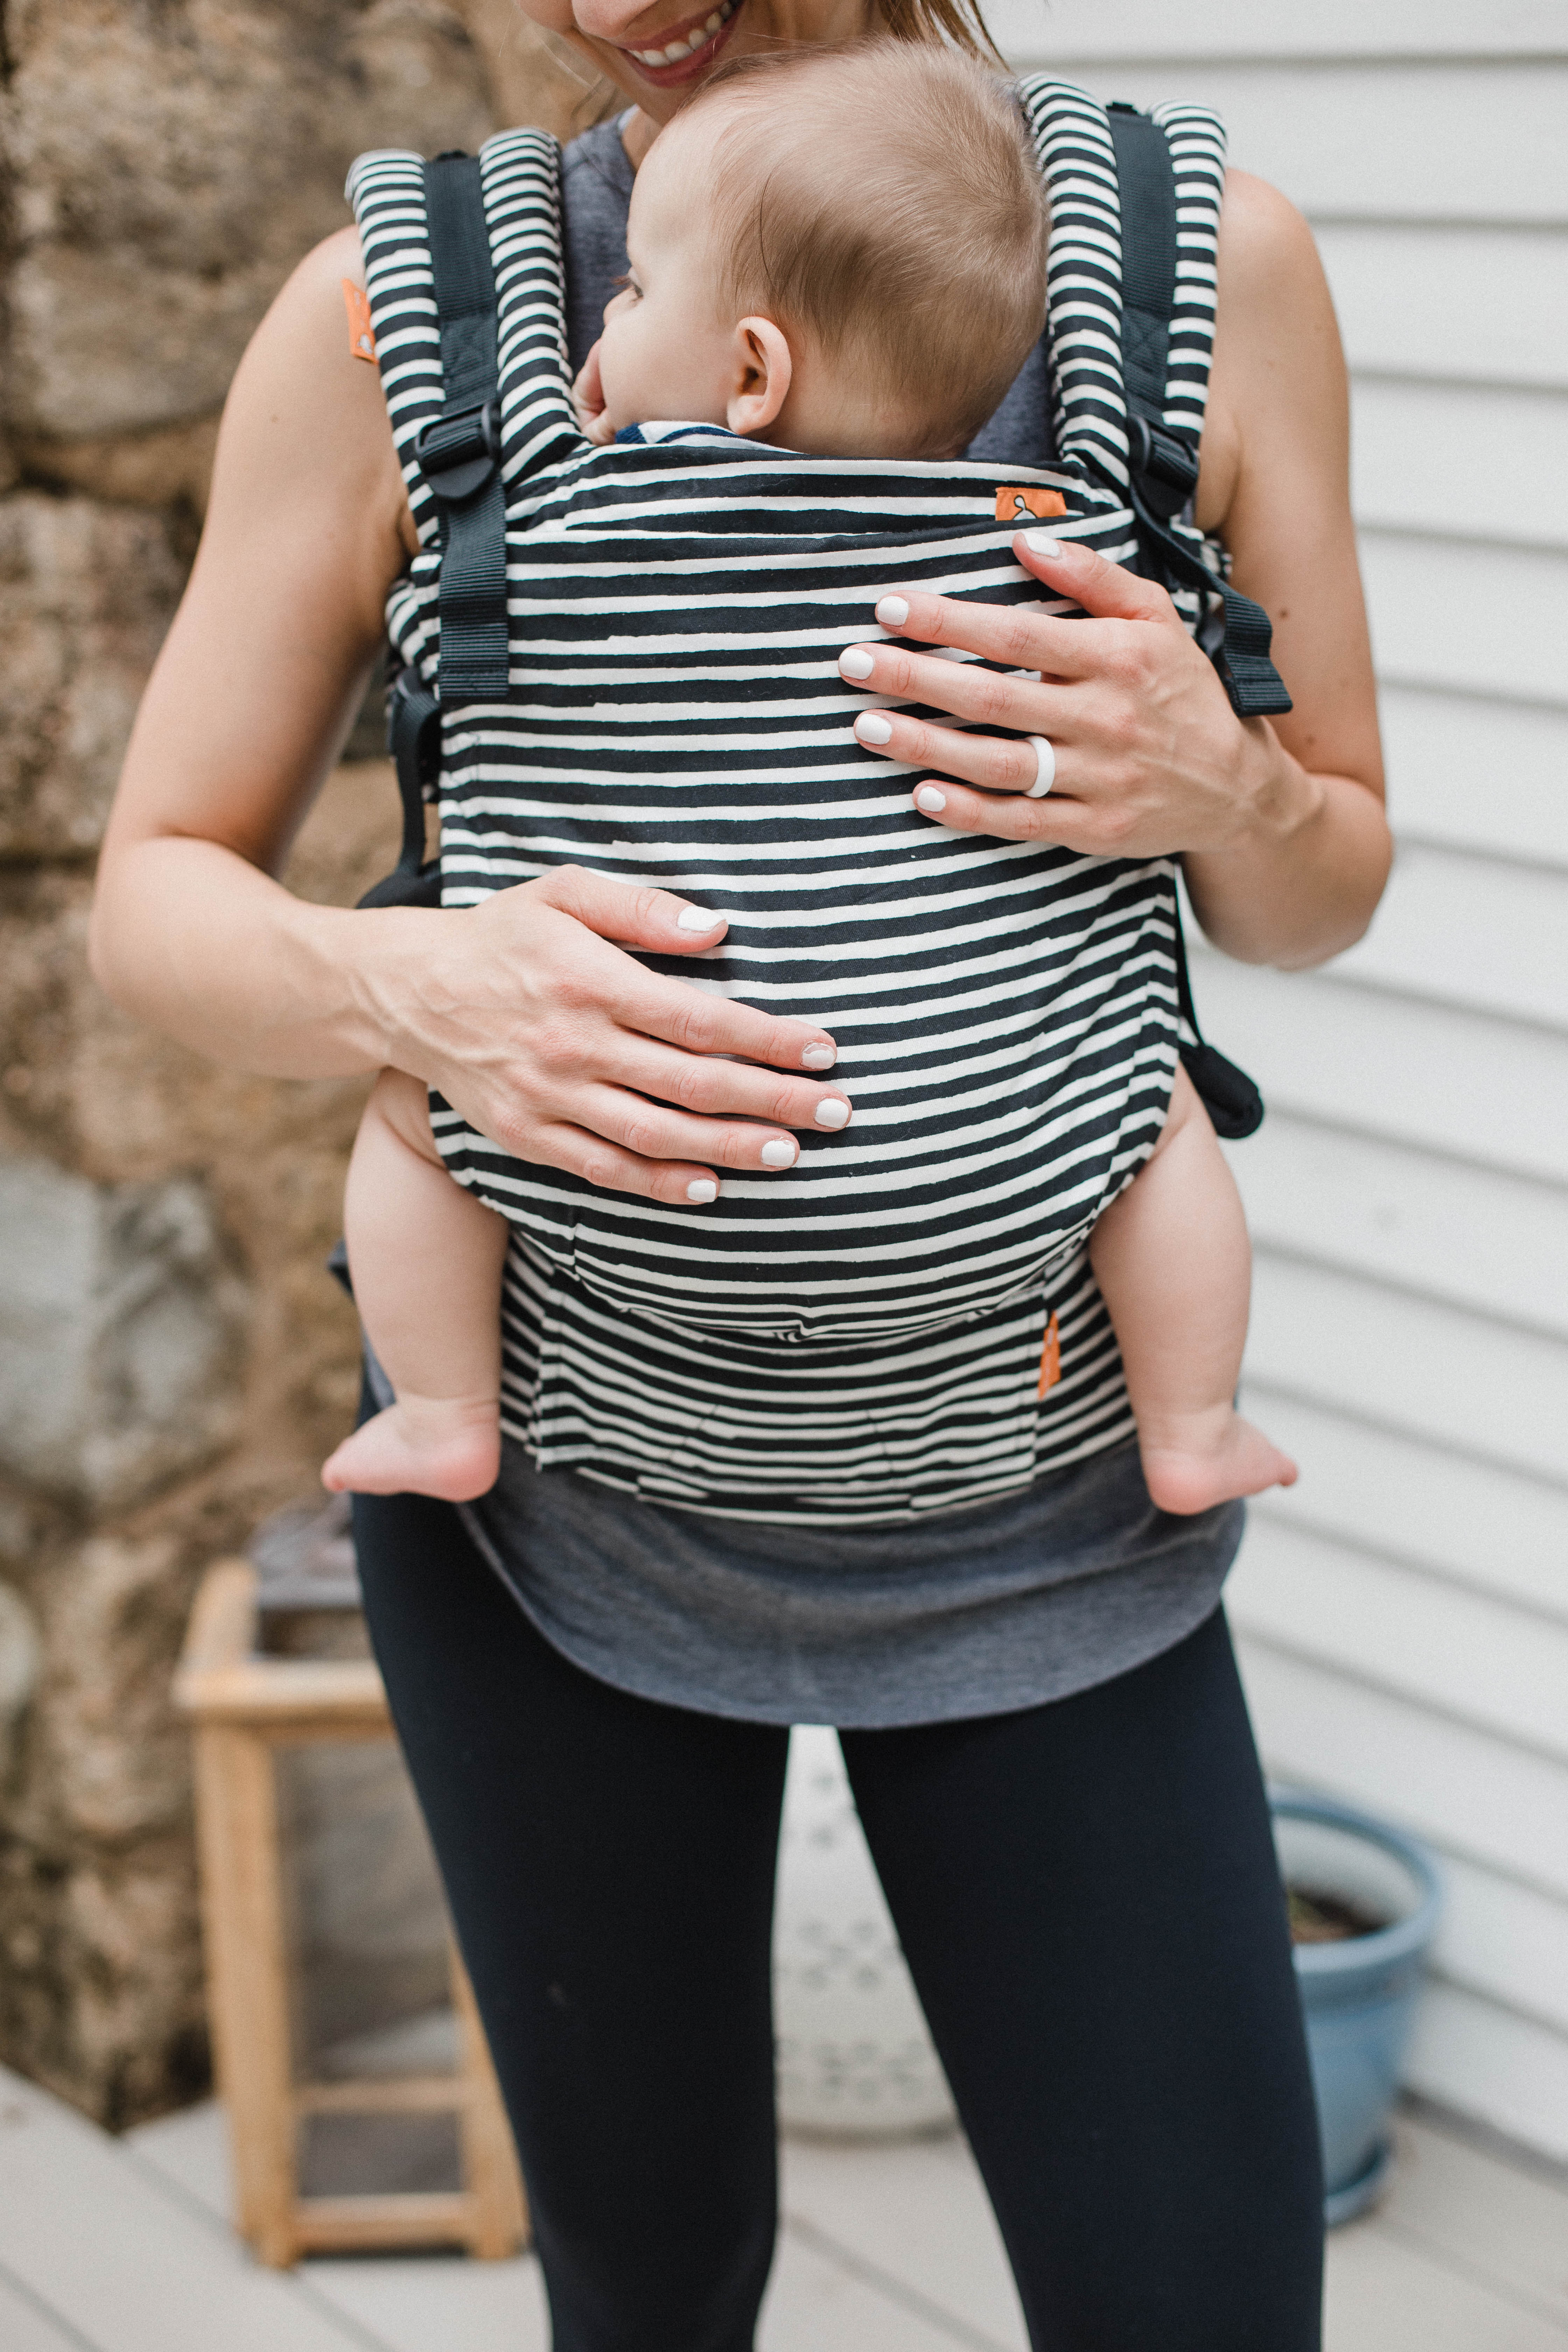 Connecticut life and style blogger Lauren McBride shares the Best Baby Carriers for babies ages newborn to toddlerhood and the various features each offers. 